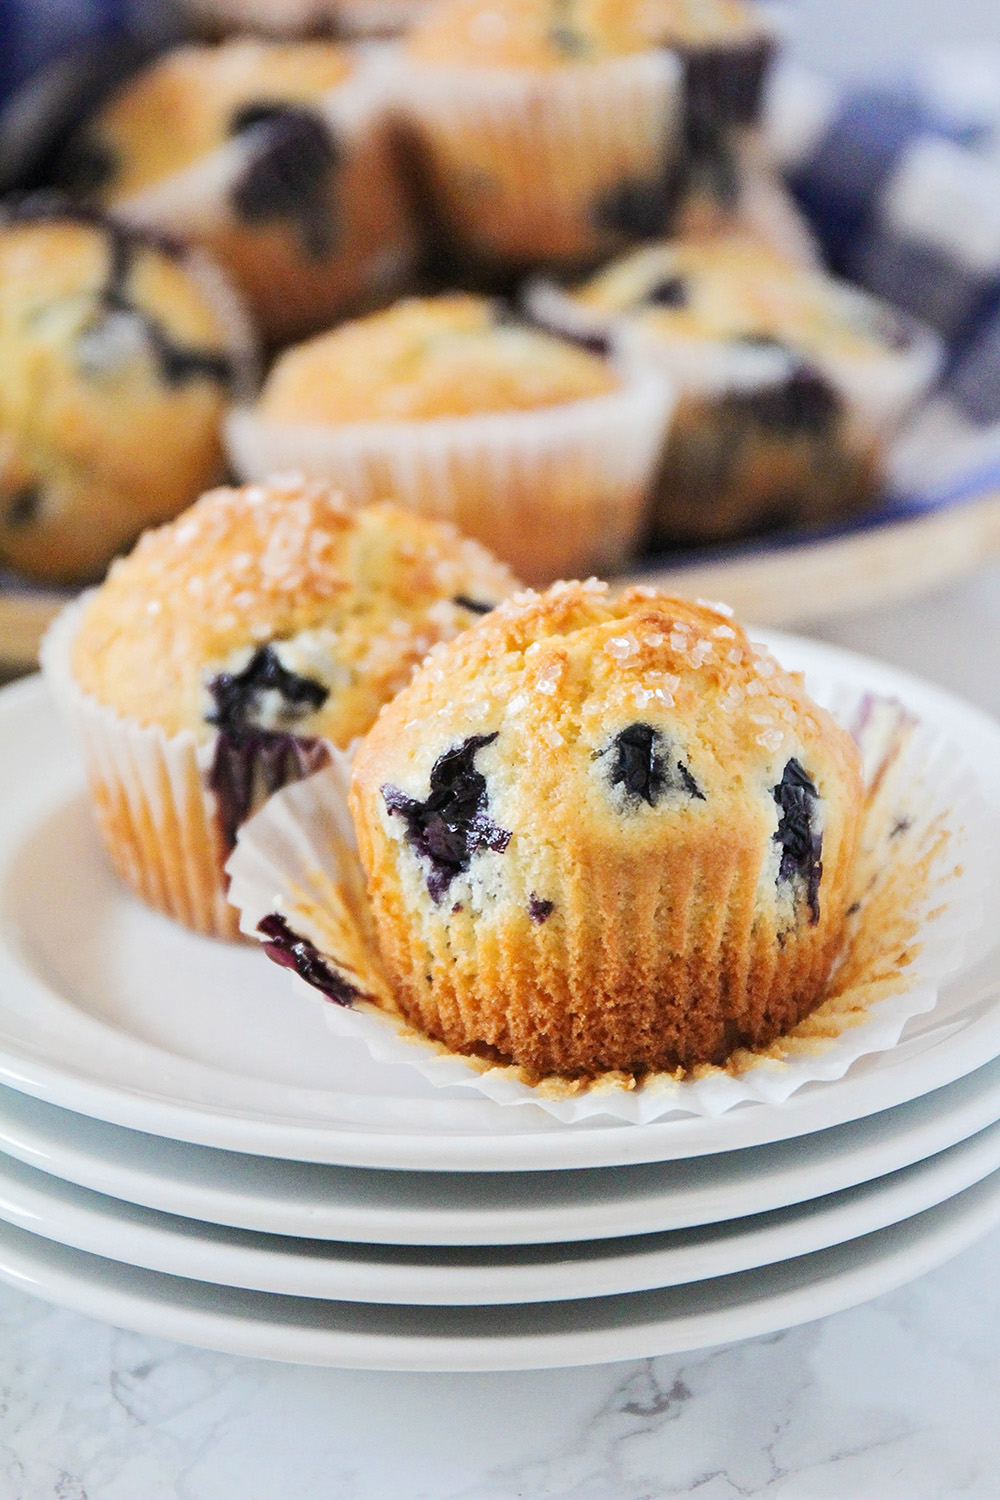 10 Scrumptious Muffin Recipes - These muffin recipes are simple and easy, and so delicious!